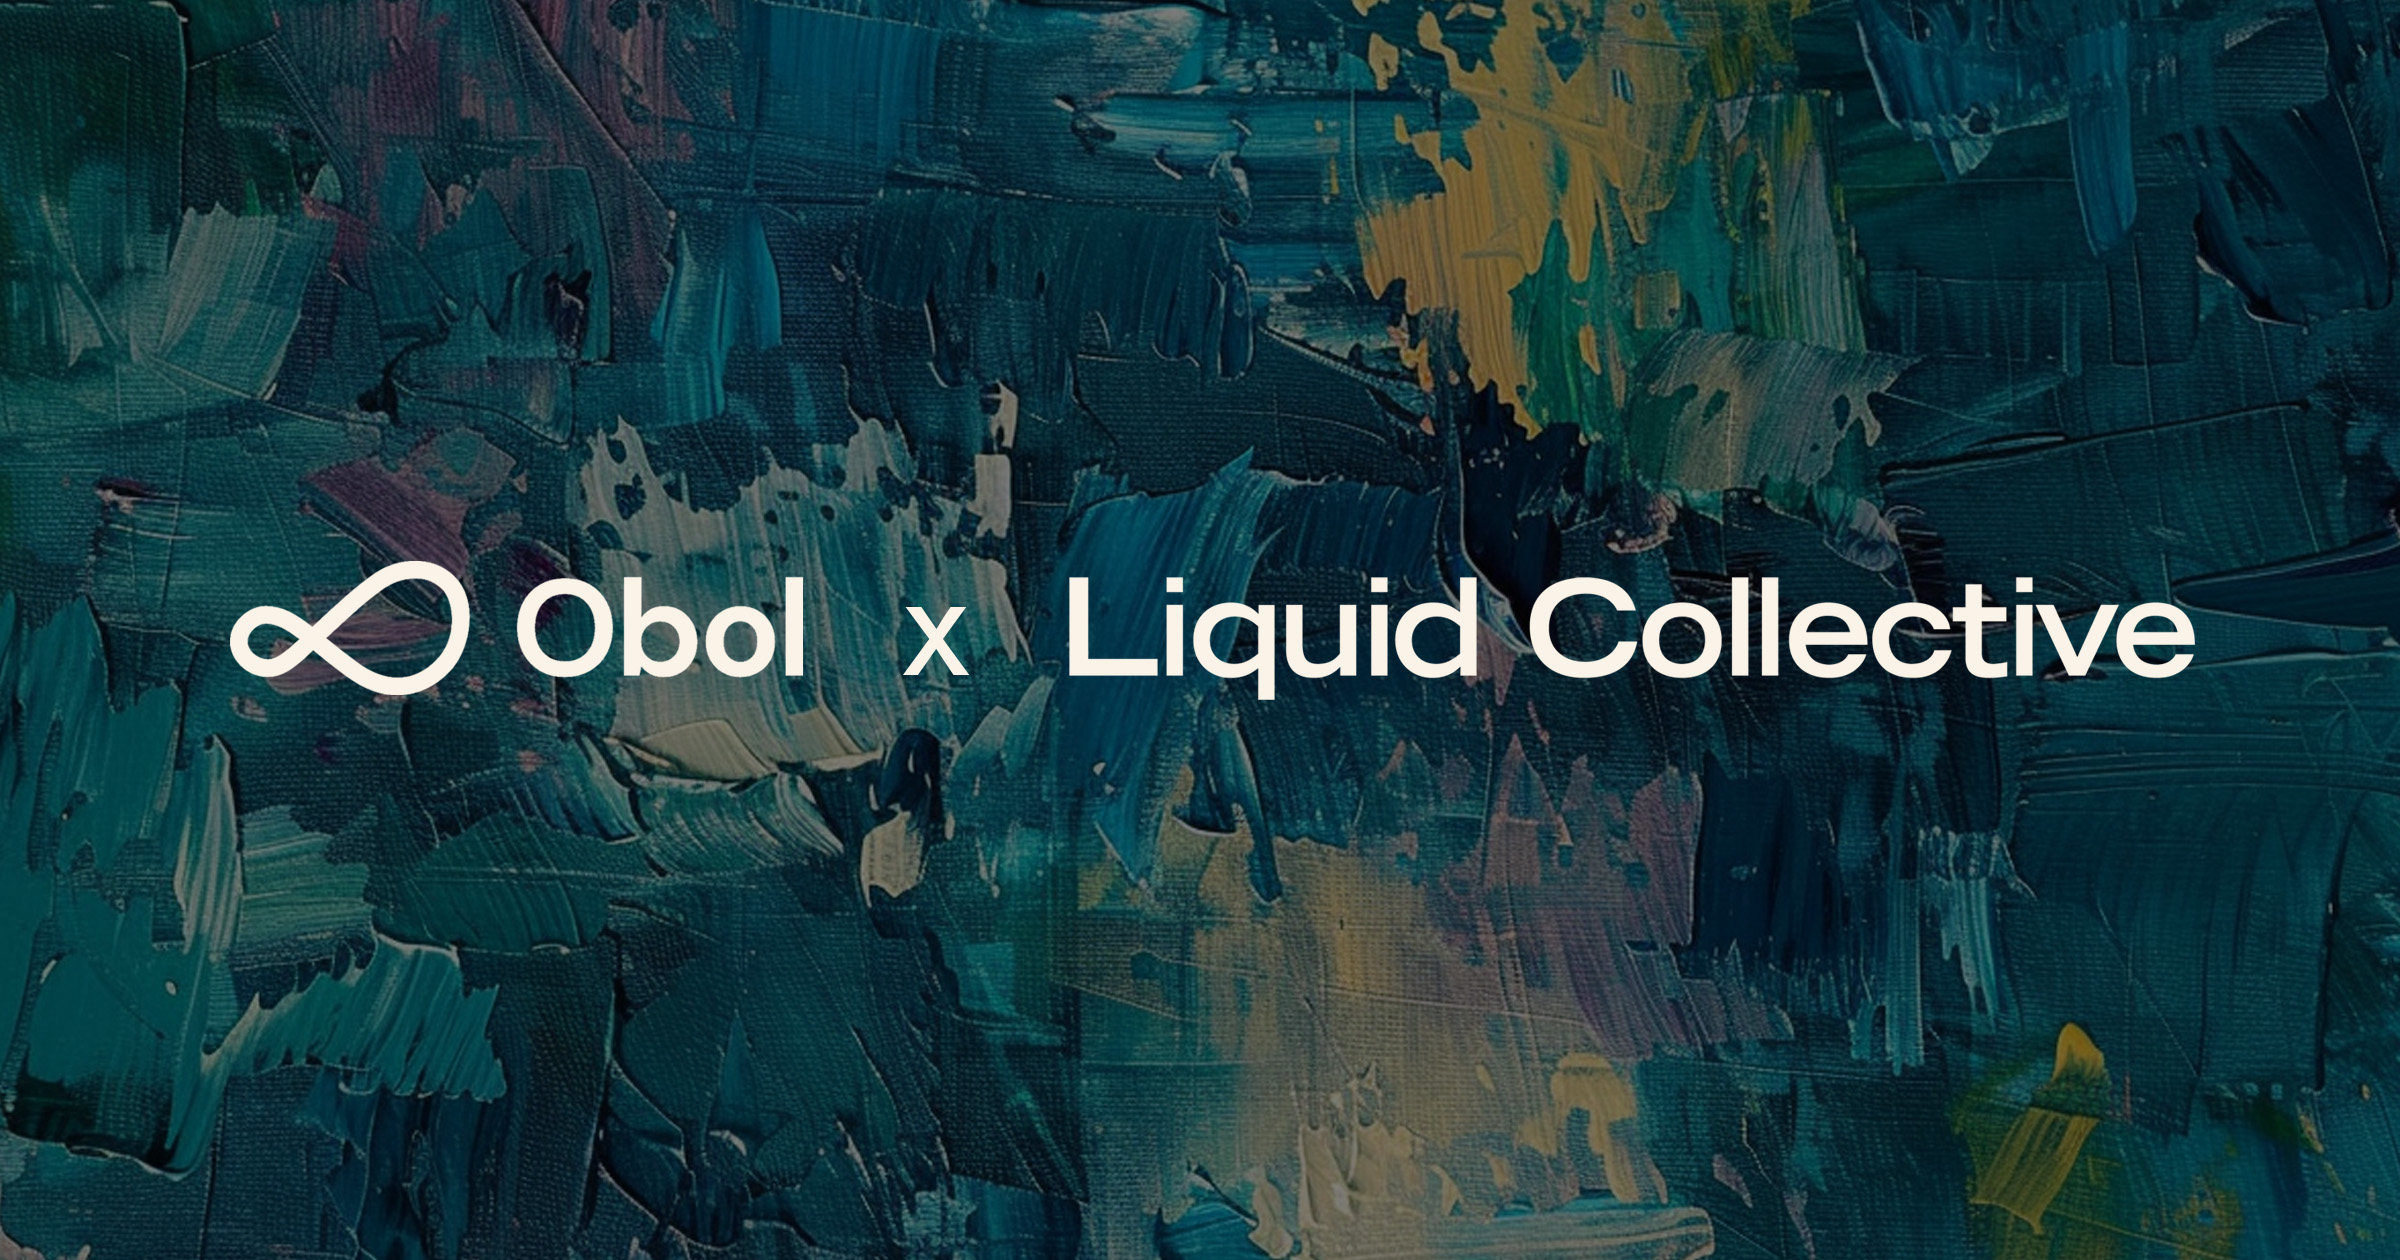 Obol Labs supports the advancement of Liquid Collective’s infrastructure